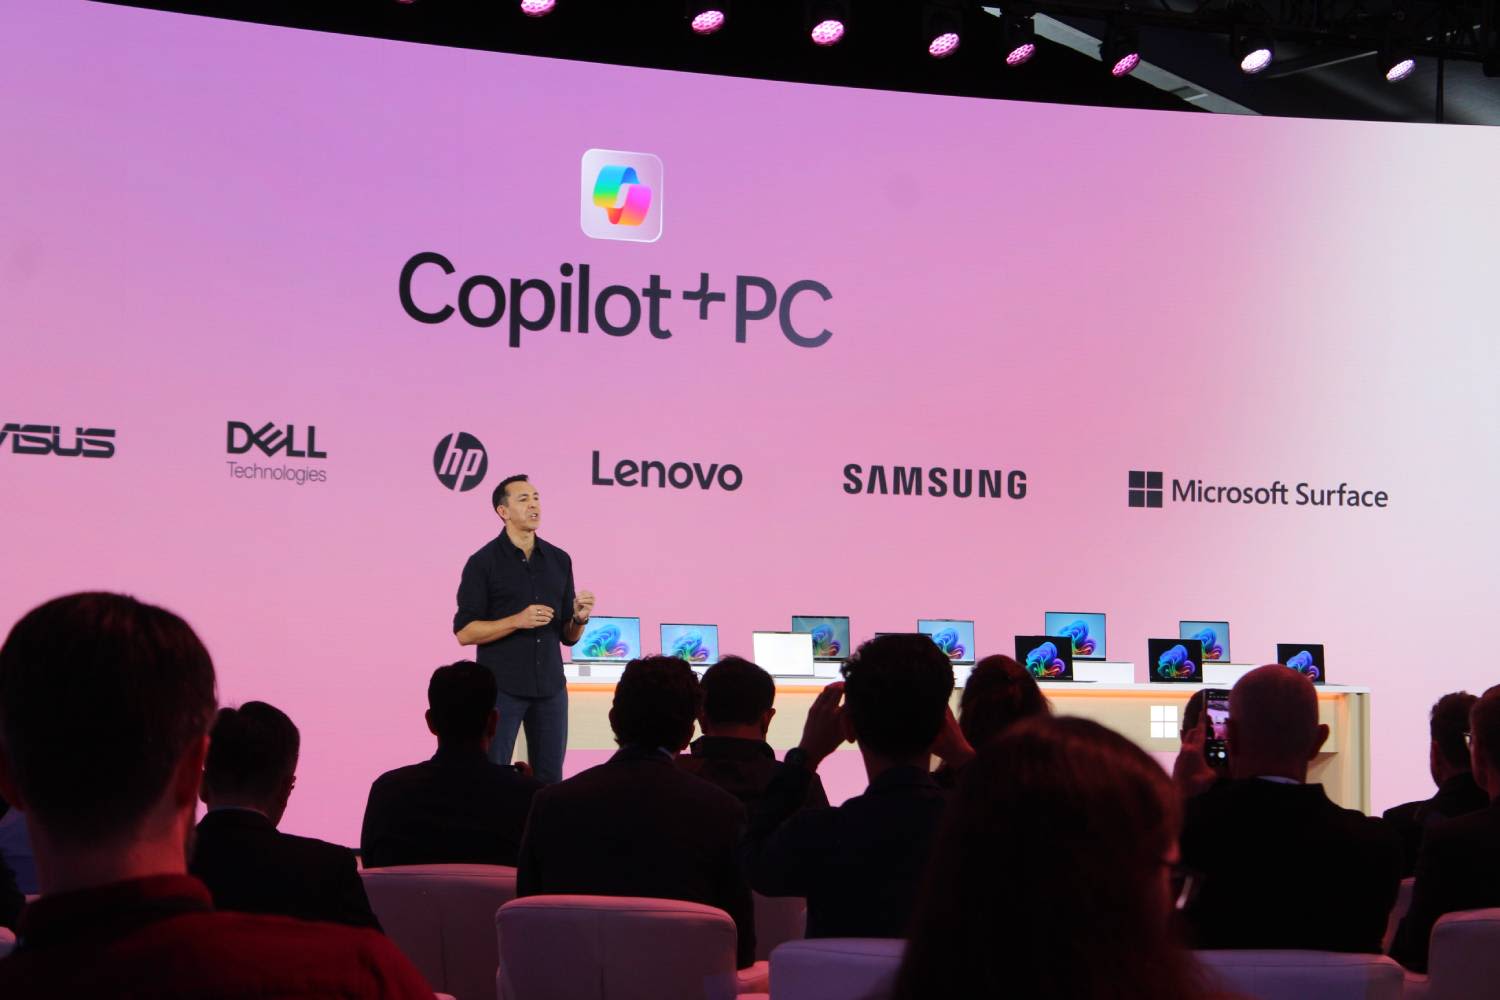 This was the most momentous PC announcement in decades